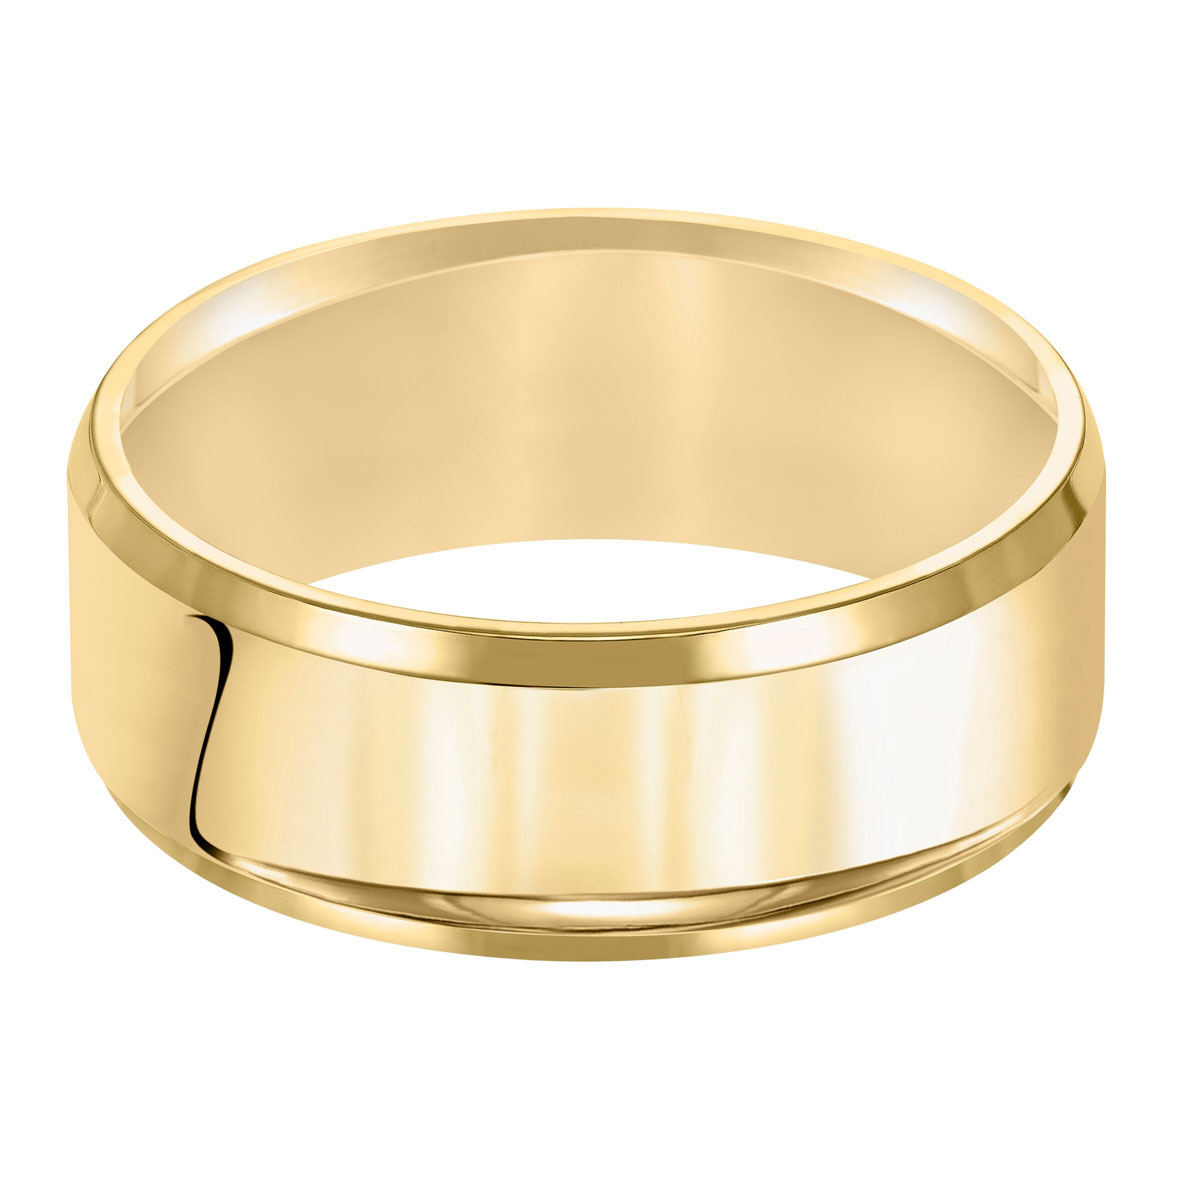 Stainless Steel Flat Weddind Bridal Band Yellow Gold Plated Beveled Edge Ring